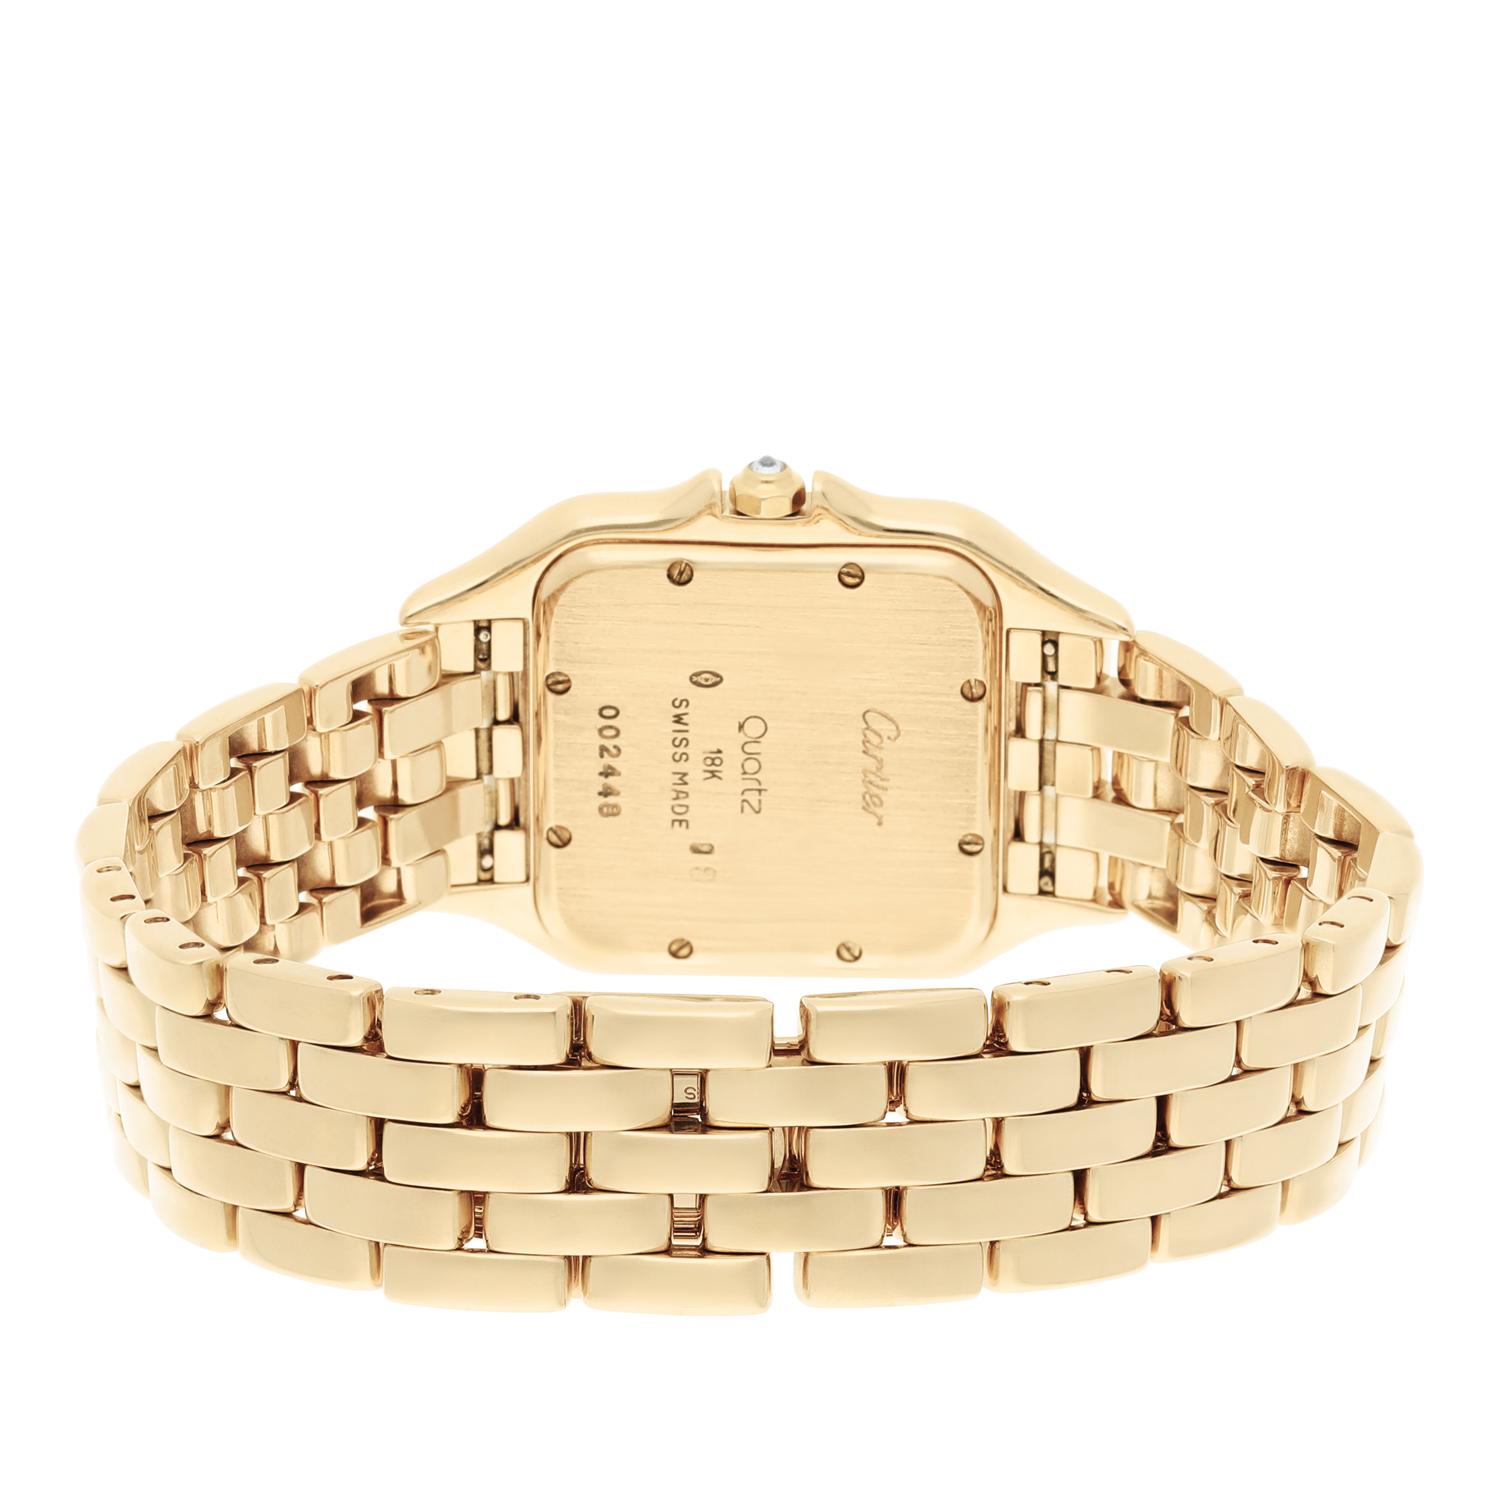 Cartier Panthere 29mm Ladies Large 18K Yellow Gold Watch with Diamonds 887968 For Sale 3